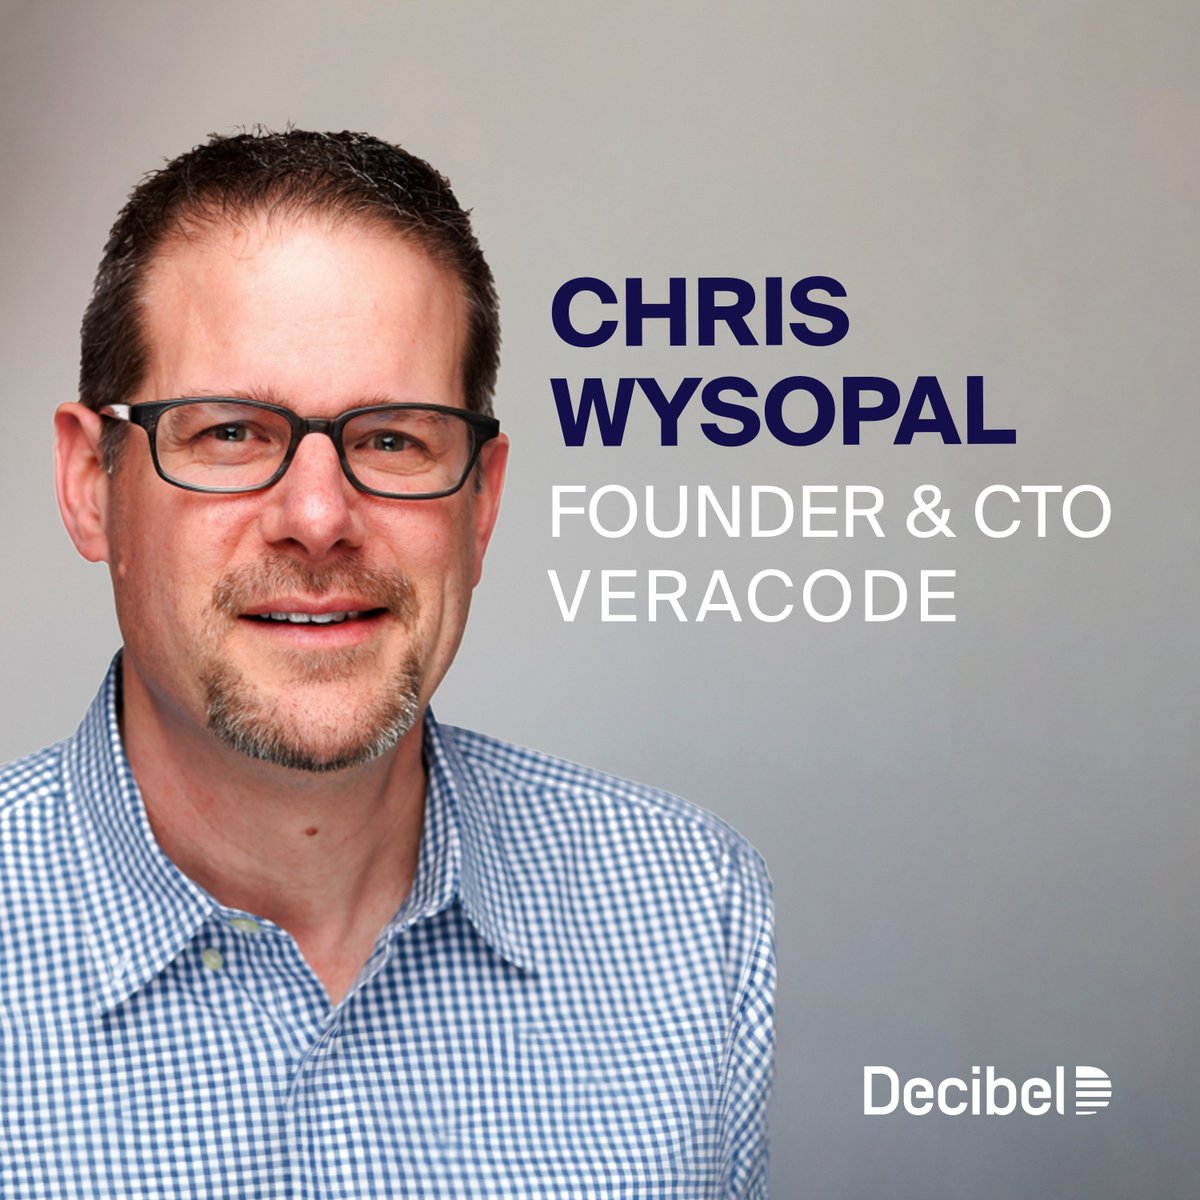 New “Founders Helping Founders” podcast! Chris Wysopal (@WeldPond) is the founder of Veracode (@veracode), a $2.5 billion cybersecurity company He is one of the first hackers turned founders who turned his curiosity in computing into a creative force as an entrepreneur As a